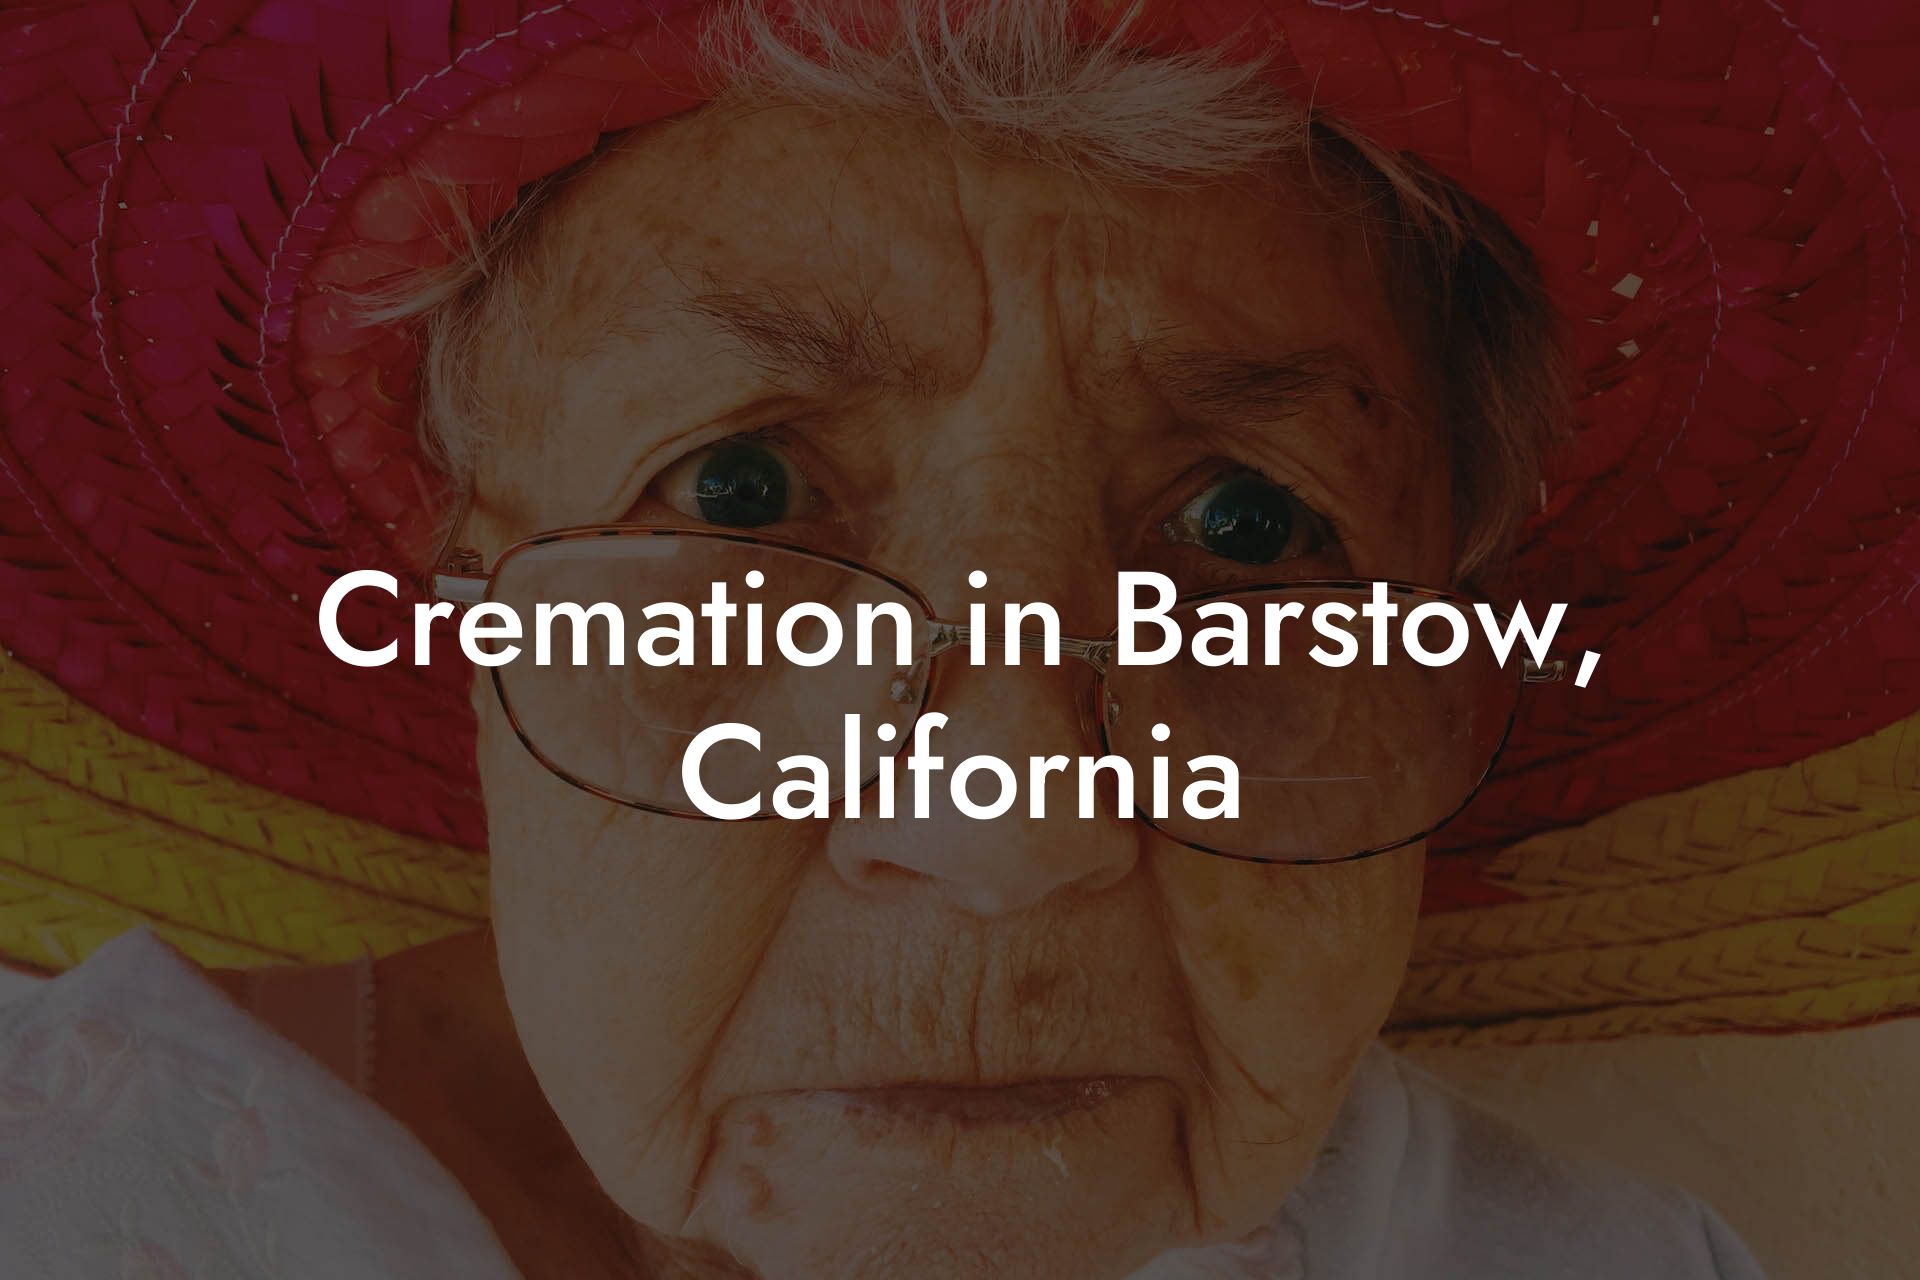 Cremation in Barstow, California